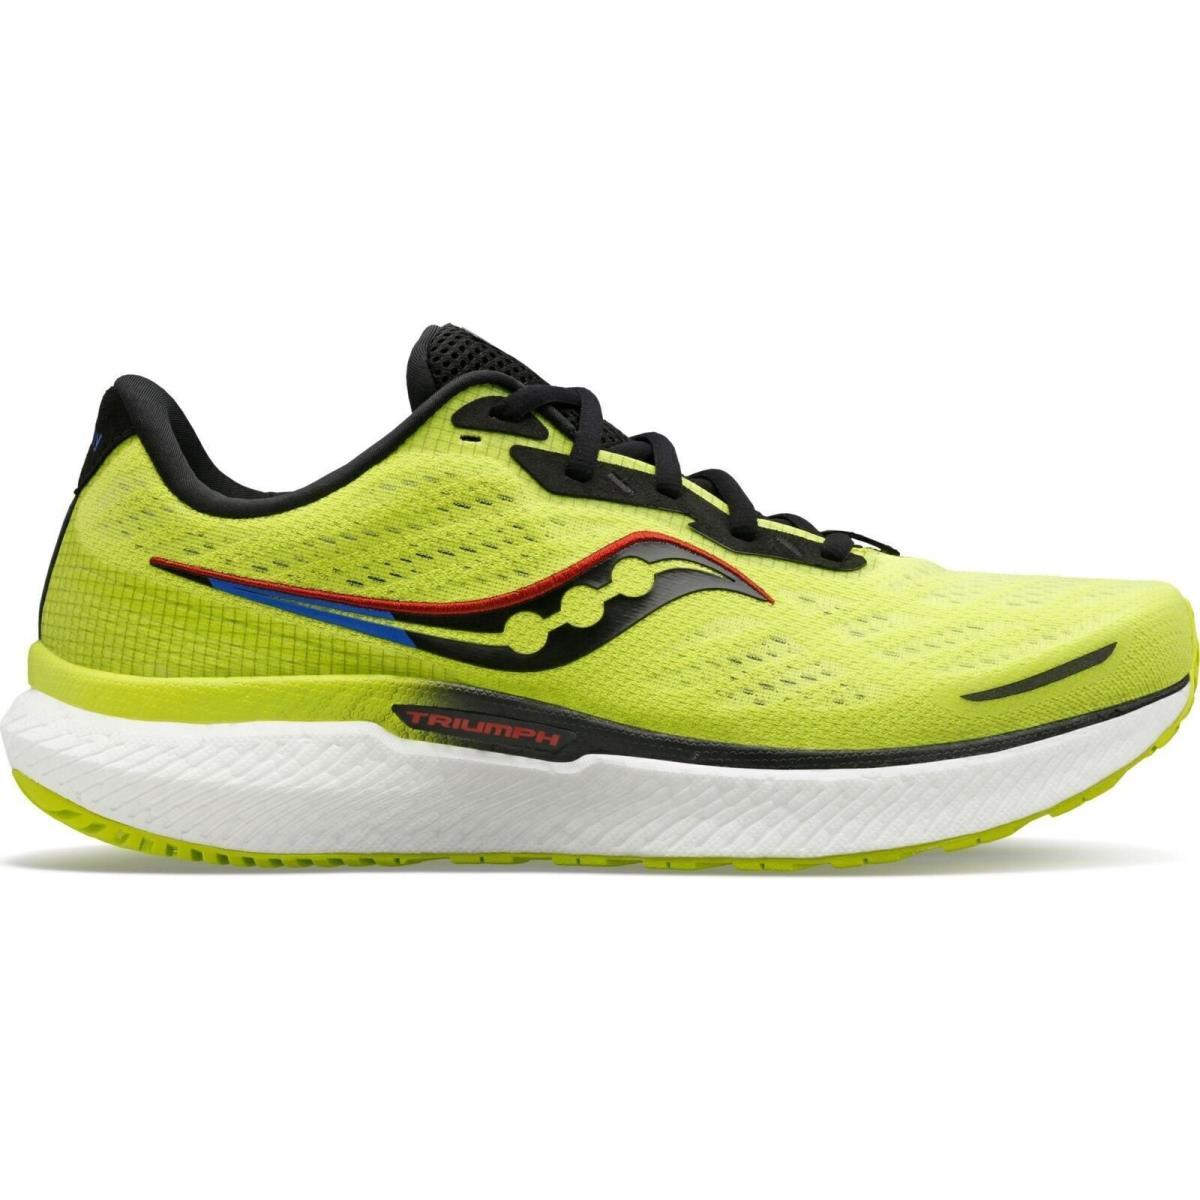 Saucony Triumph 19 S20678-25 Men`s Yellow Low Top Running Sneaker Shoes NR4601 - Yellow